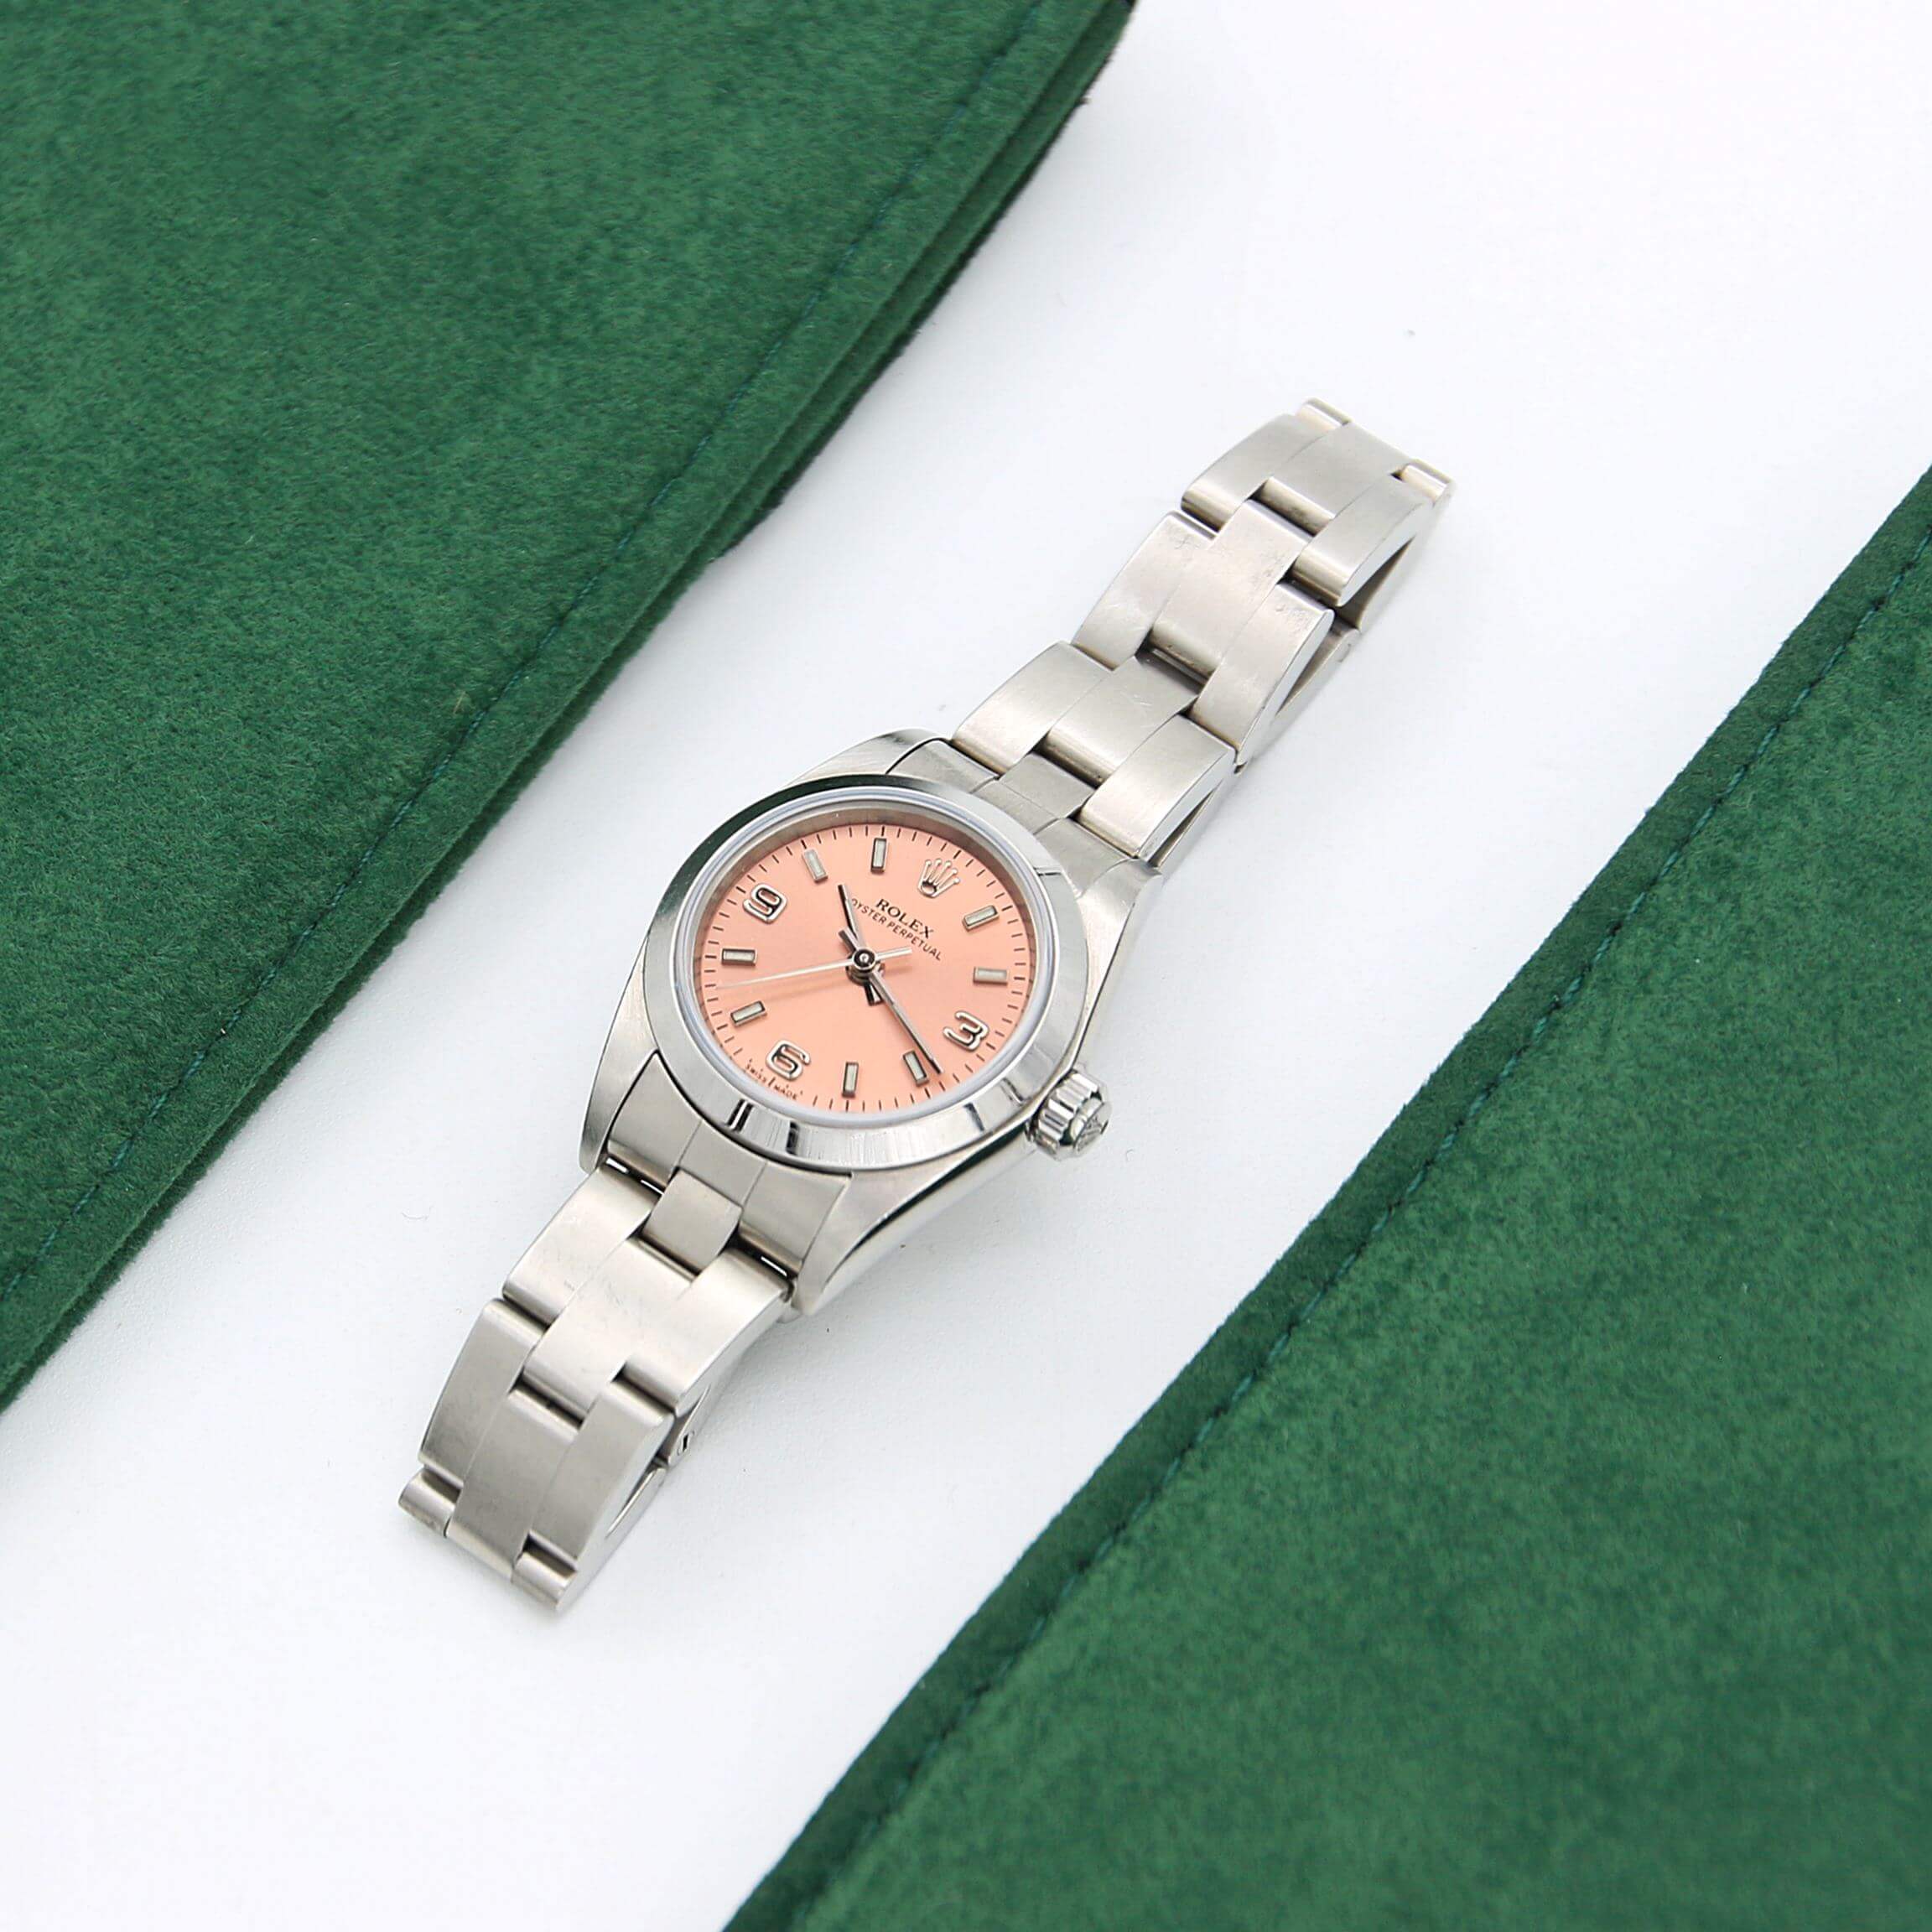 Rolex Oyster Perpetual ref. 67180 - Salmon Dial - Full Set